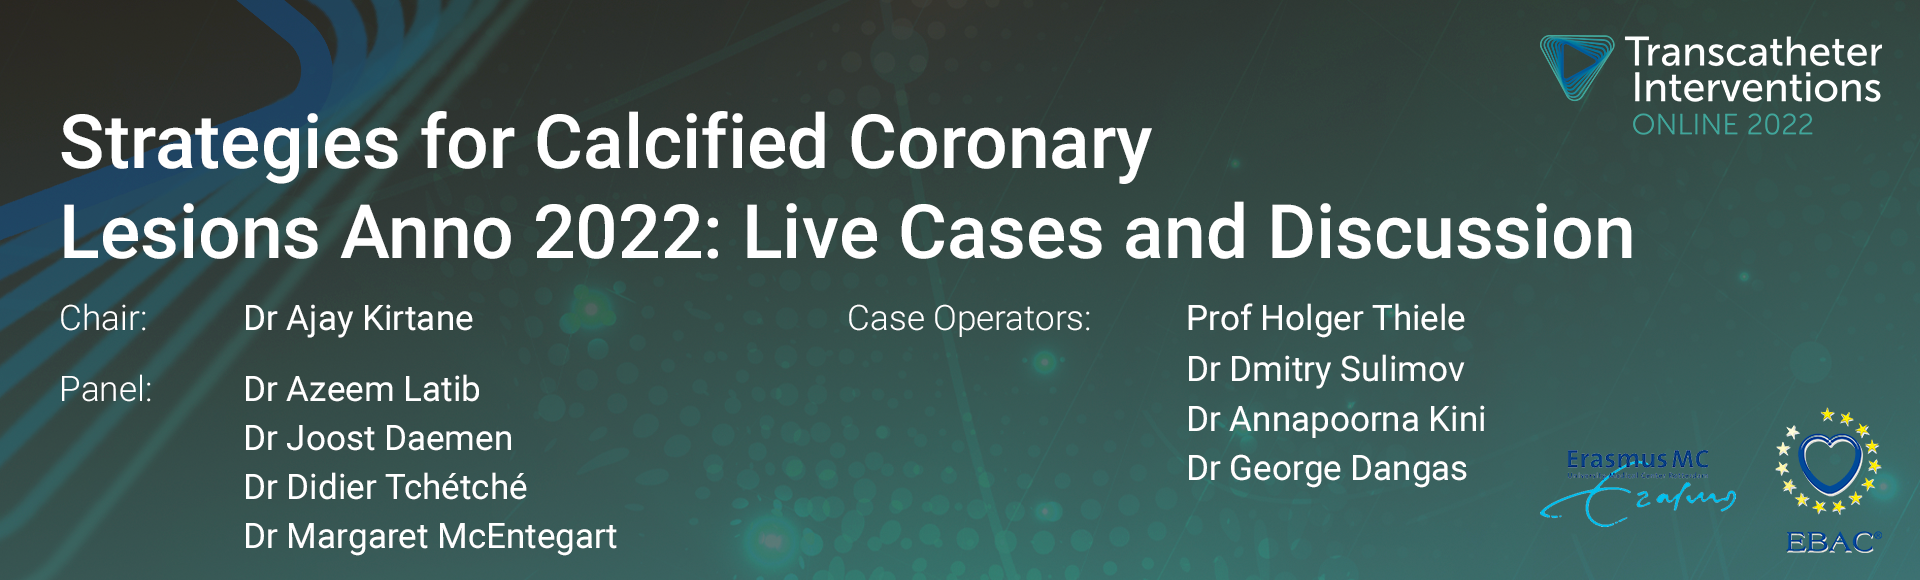 TIO 2022 - Session 2.2: Strategies For Calcified Coronary Lesions Anno 2022: Live Cases And Discussion